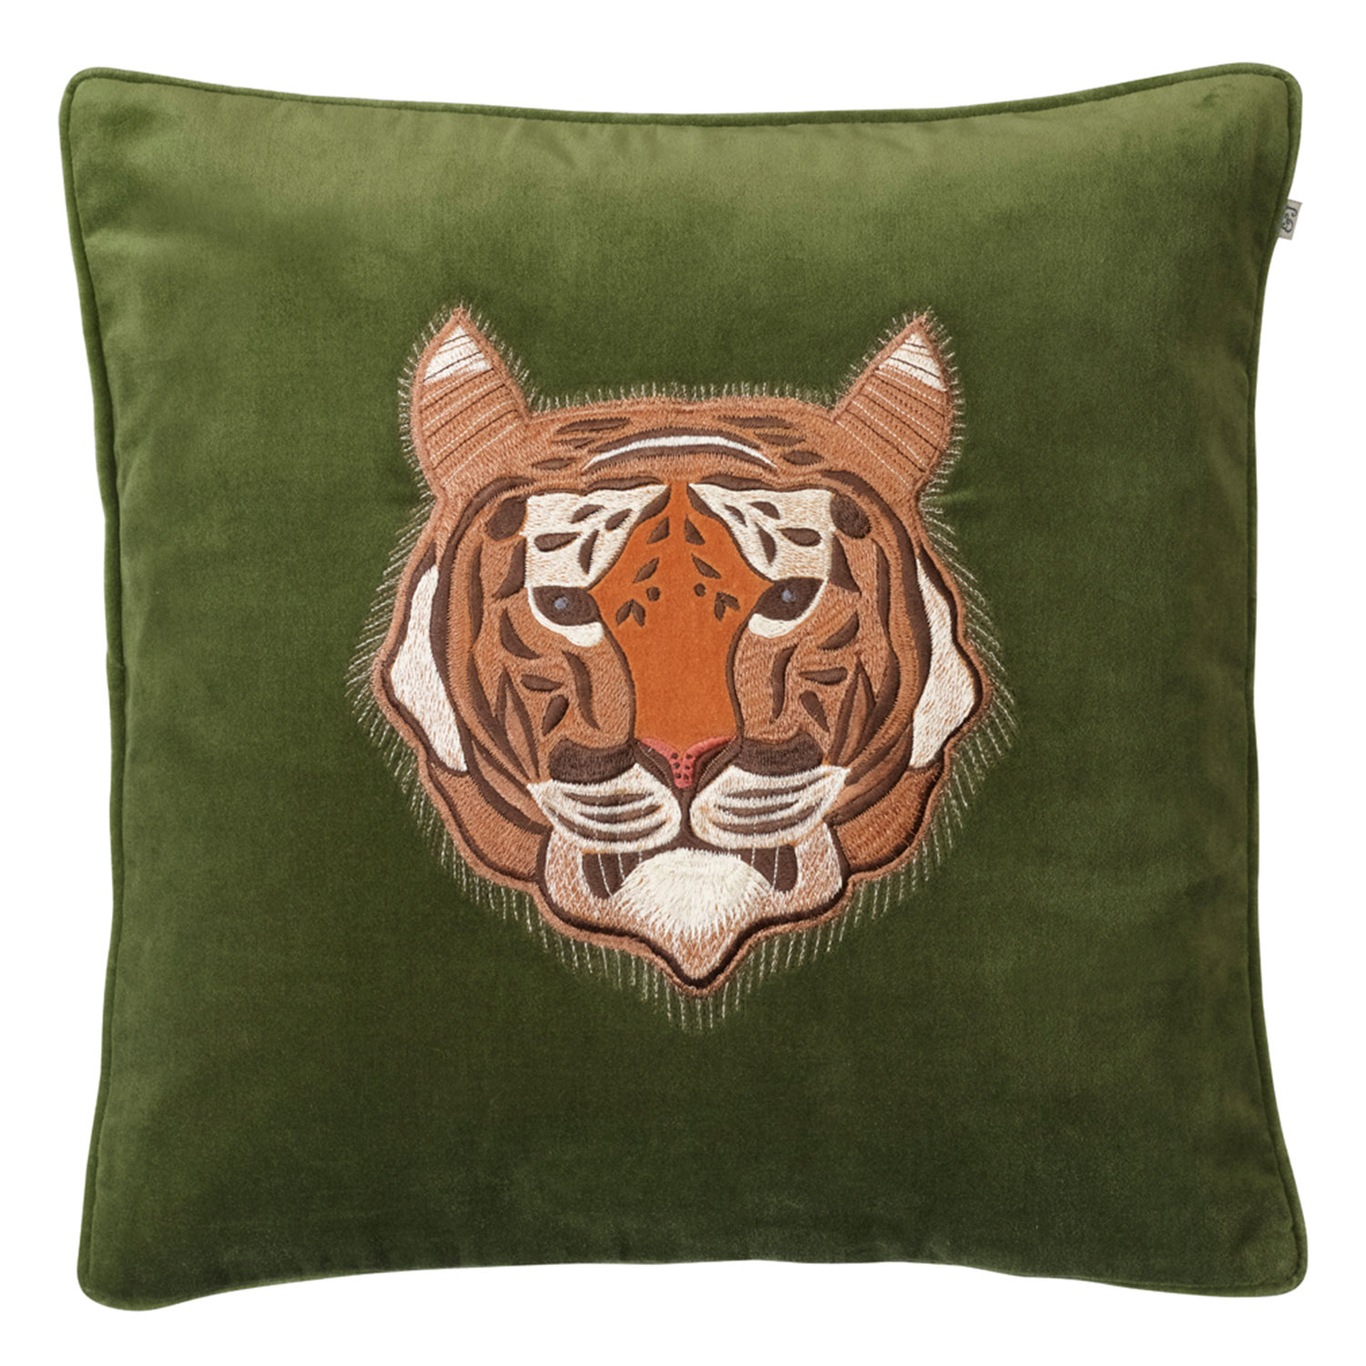 Embroidered Tiger Velvet Cushion Cover 50x50 cm, Cactus Green